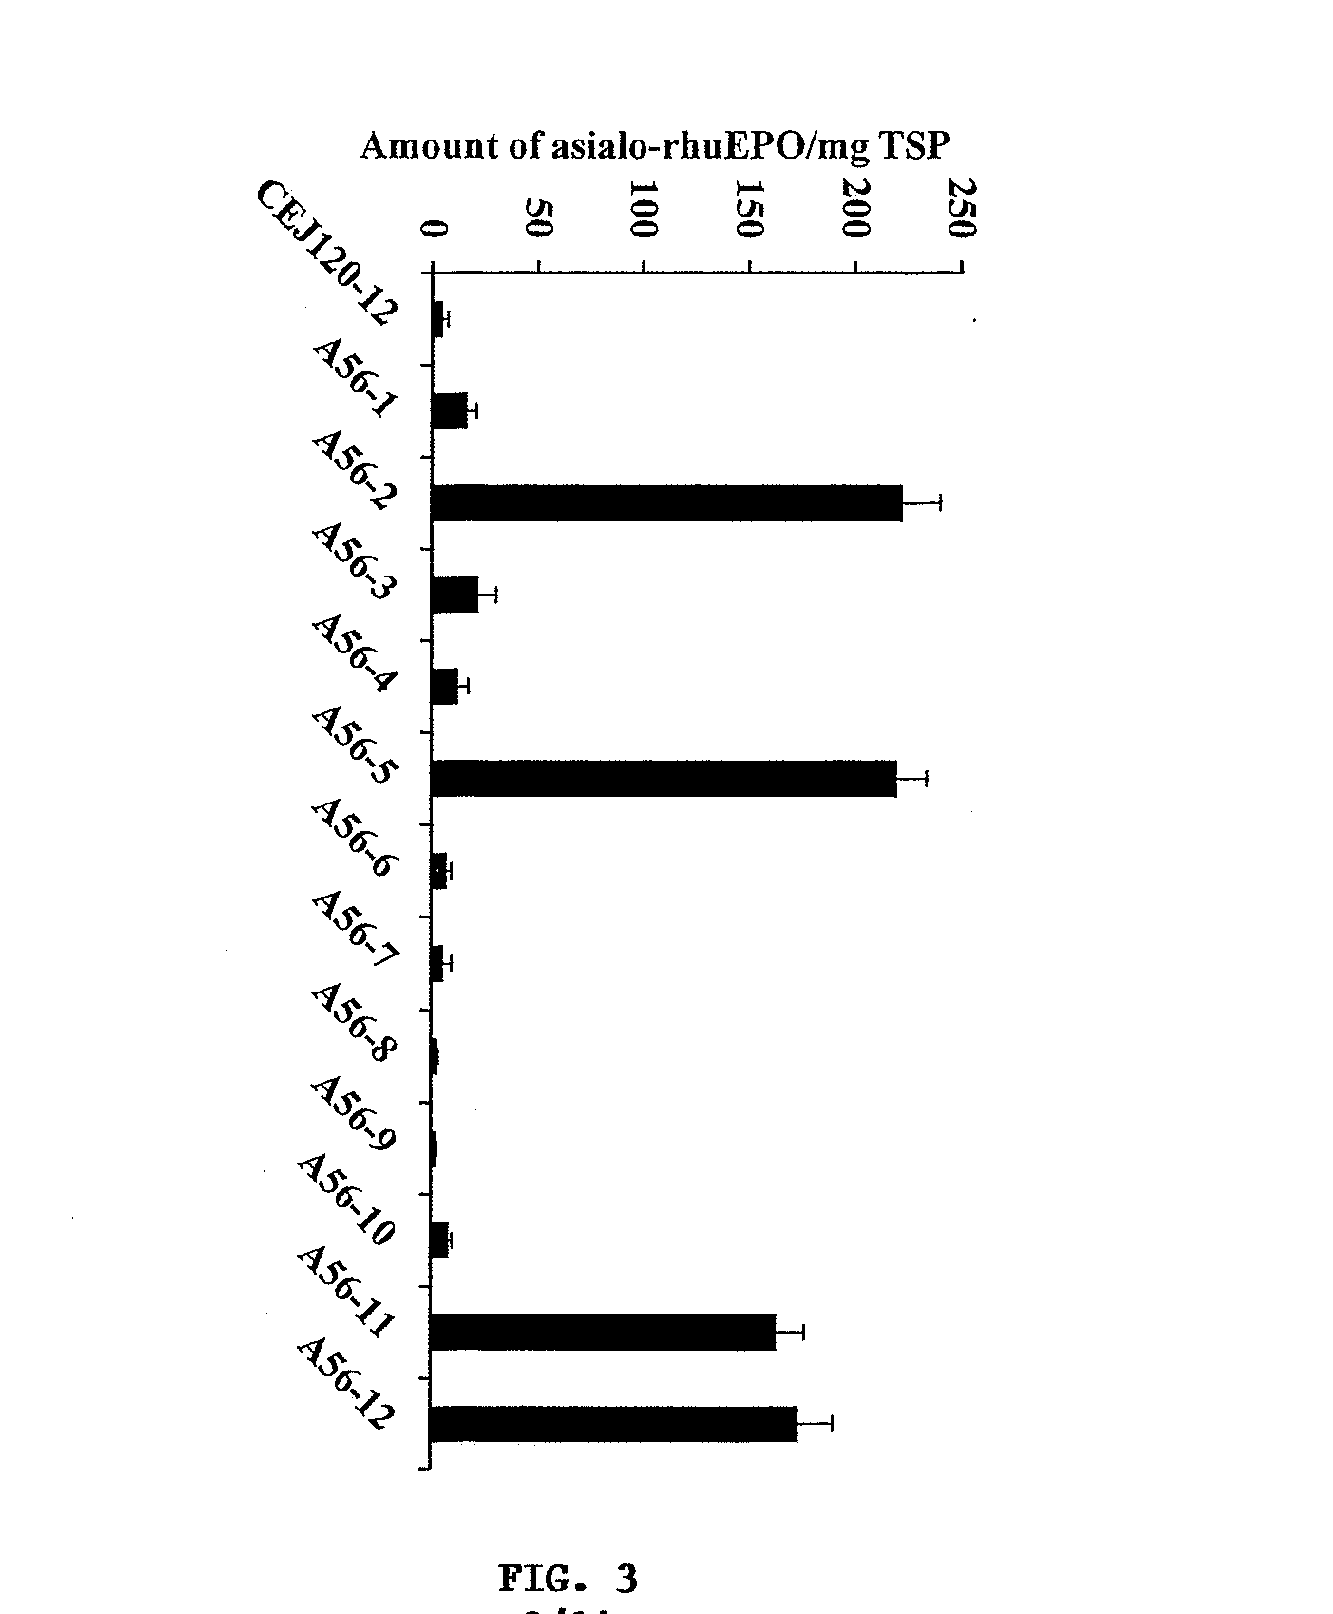 Methods for the production of cytoprotective asialo-erythropoietin in plants and its purification from plant tissues